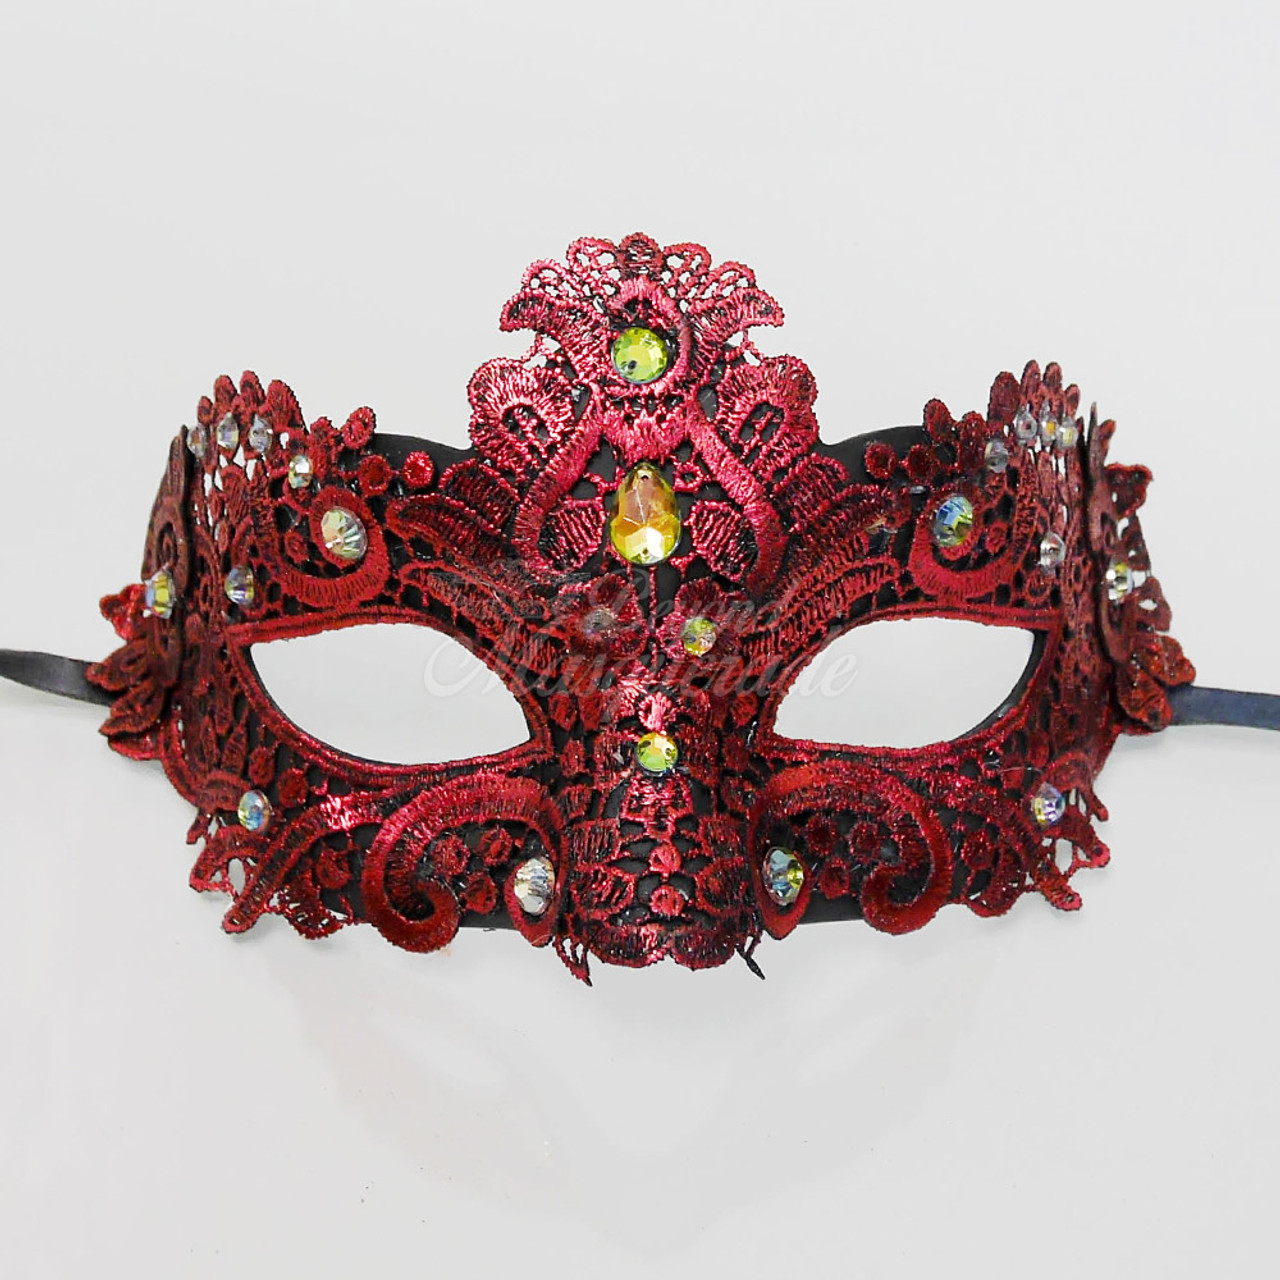 Masquerade Masks for Masquerade Ball Party Up to 60% OFF Sale